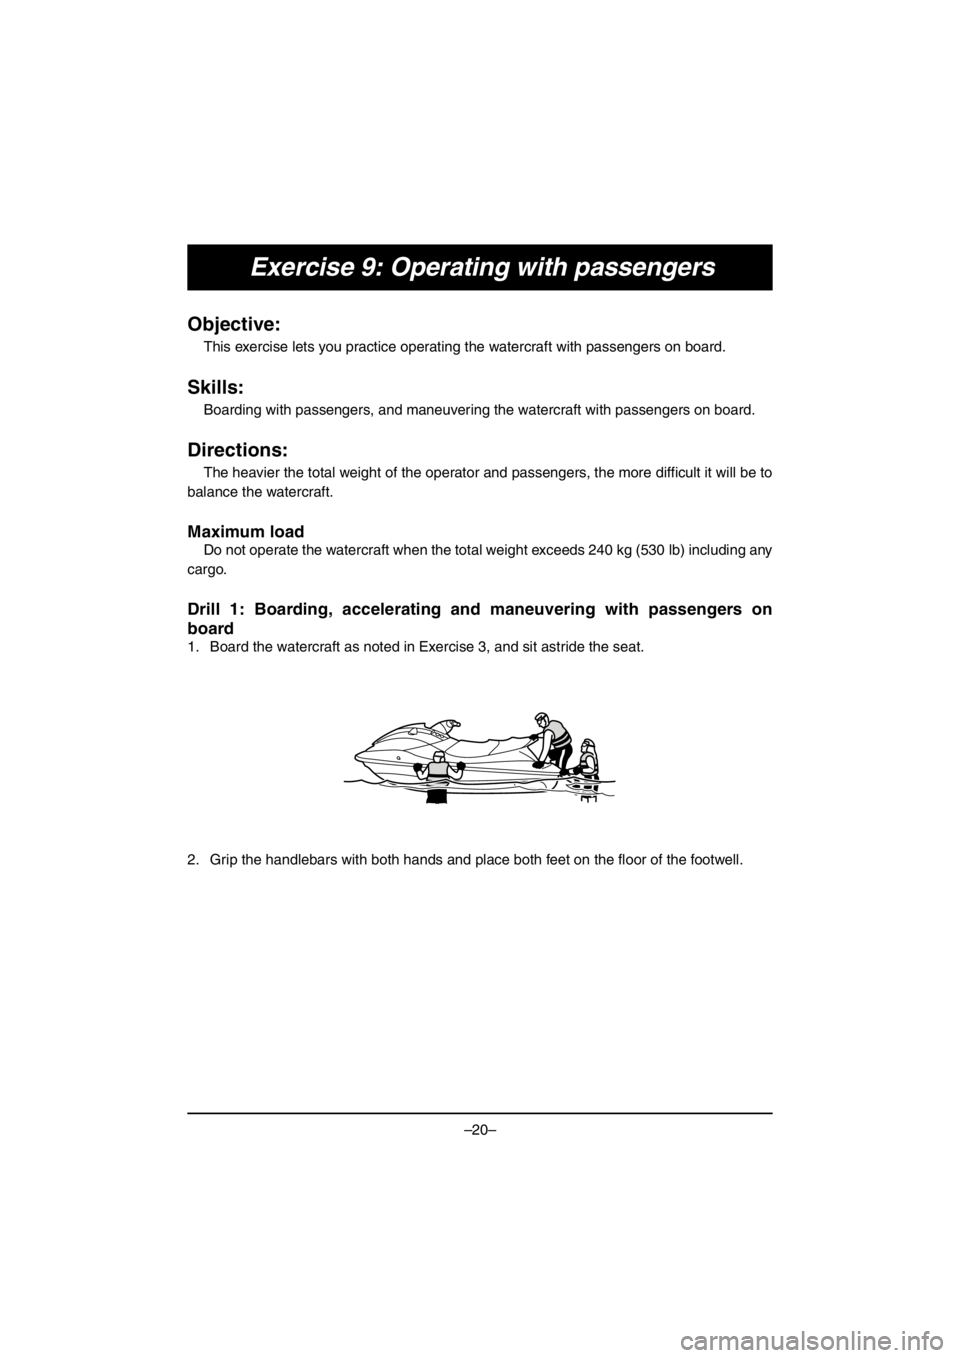 YAMAHA V1 2016 Owners Manual –20–
Exercise 9: Operating with passengers
Objective:
This exercise lets you practice operating the watercraft with passengers on board.
Skills:
Boarding with passengers, and maneuvering the water